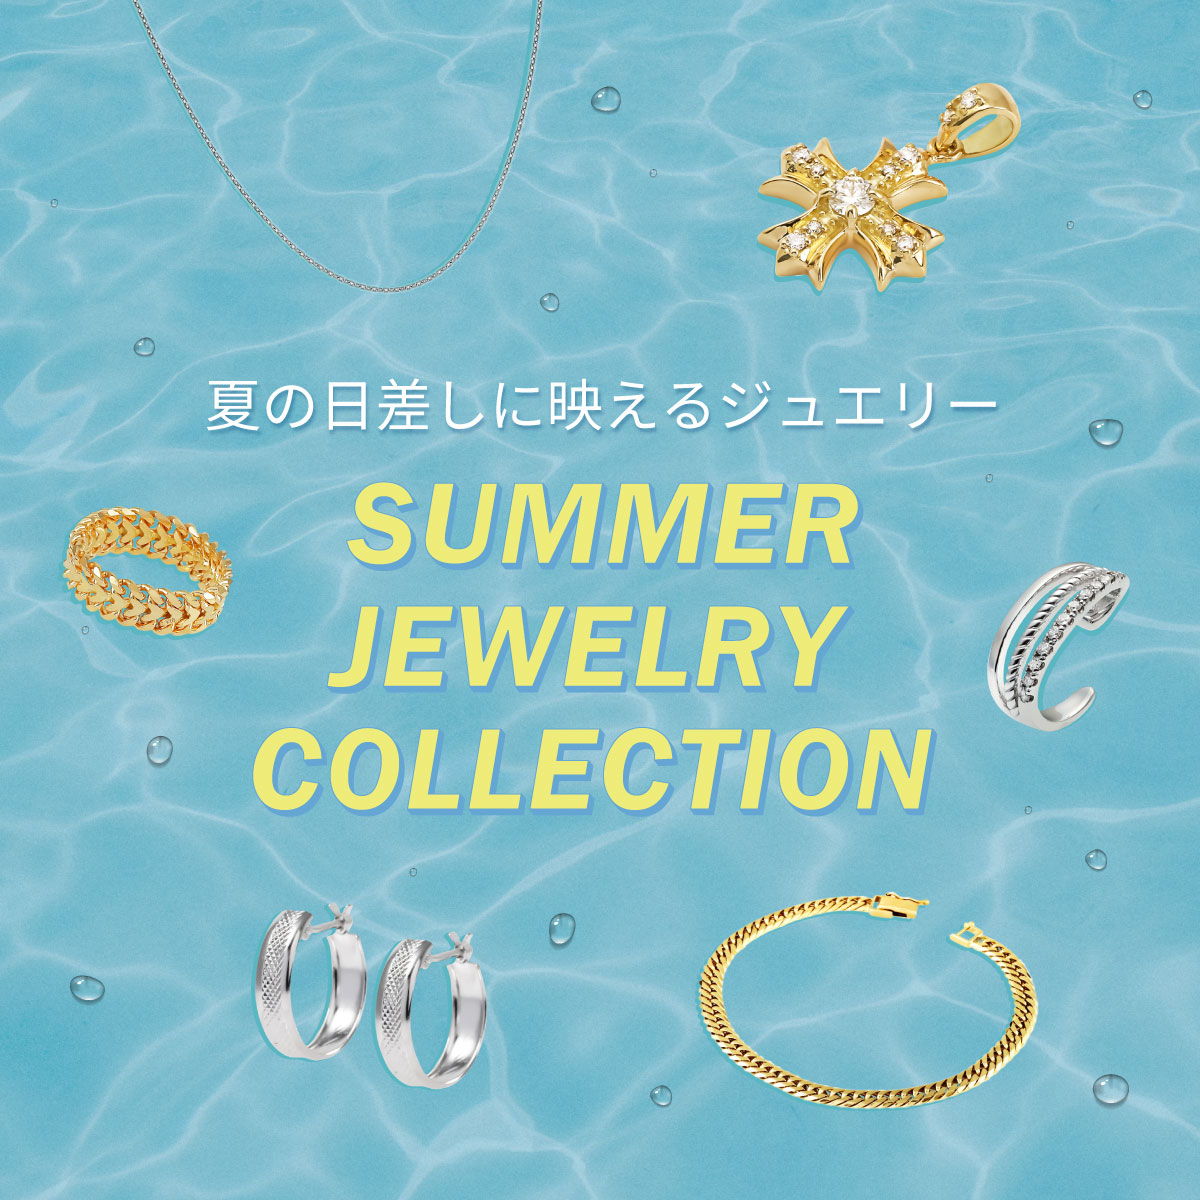 Summer Jewelry Collection